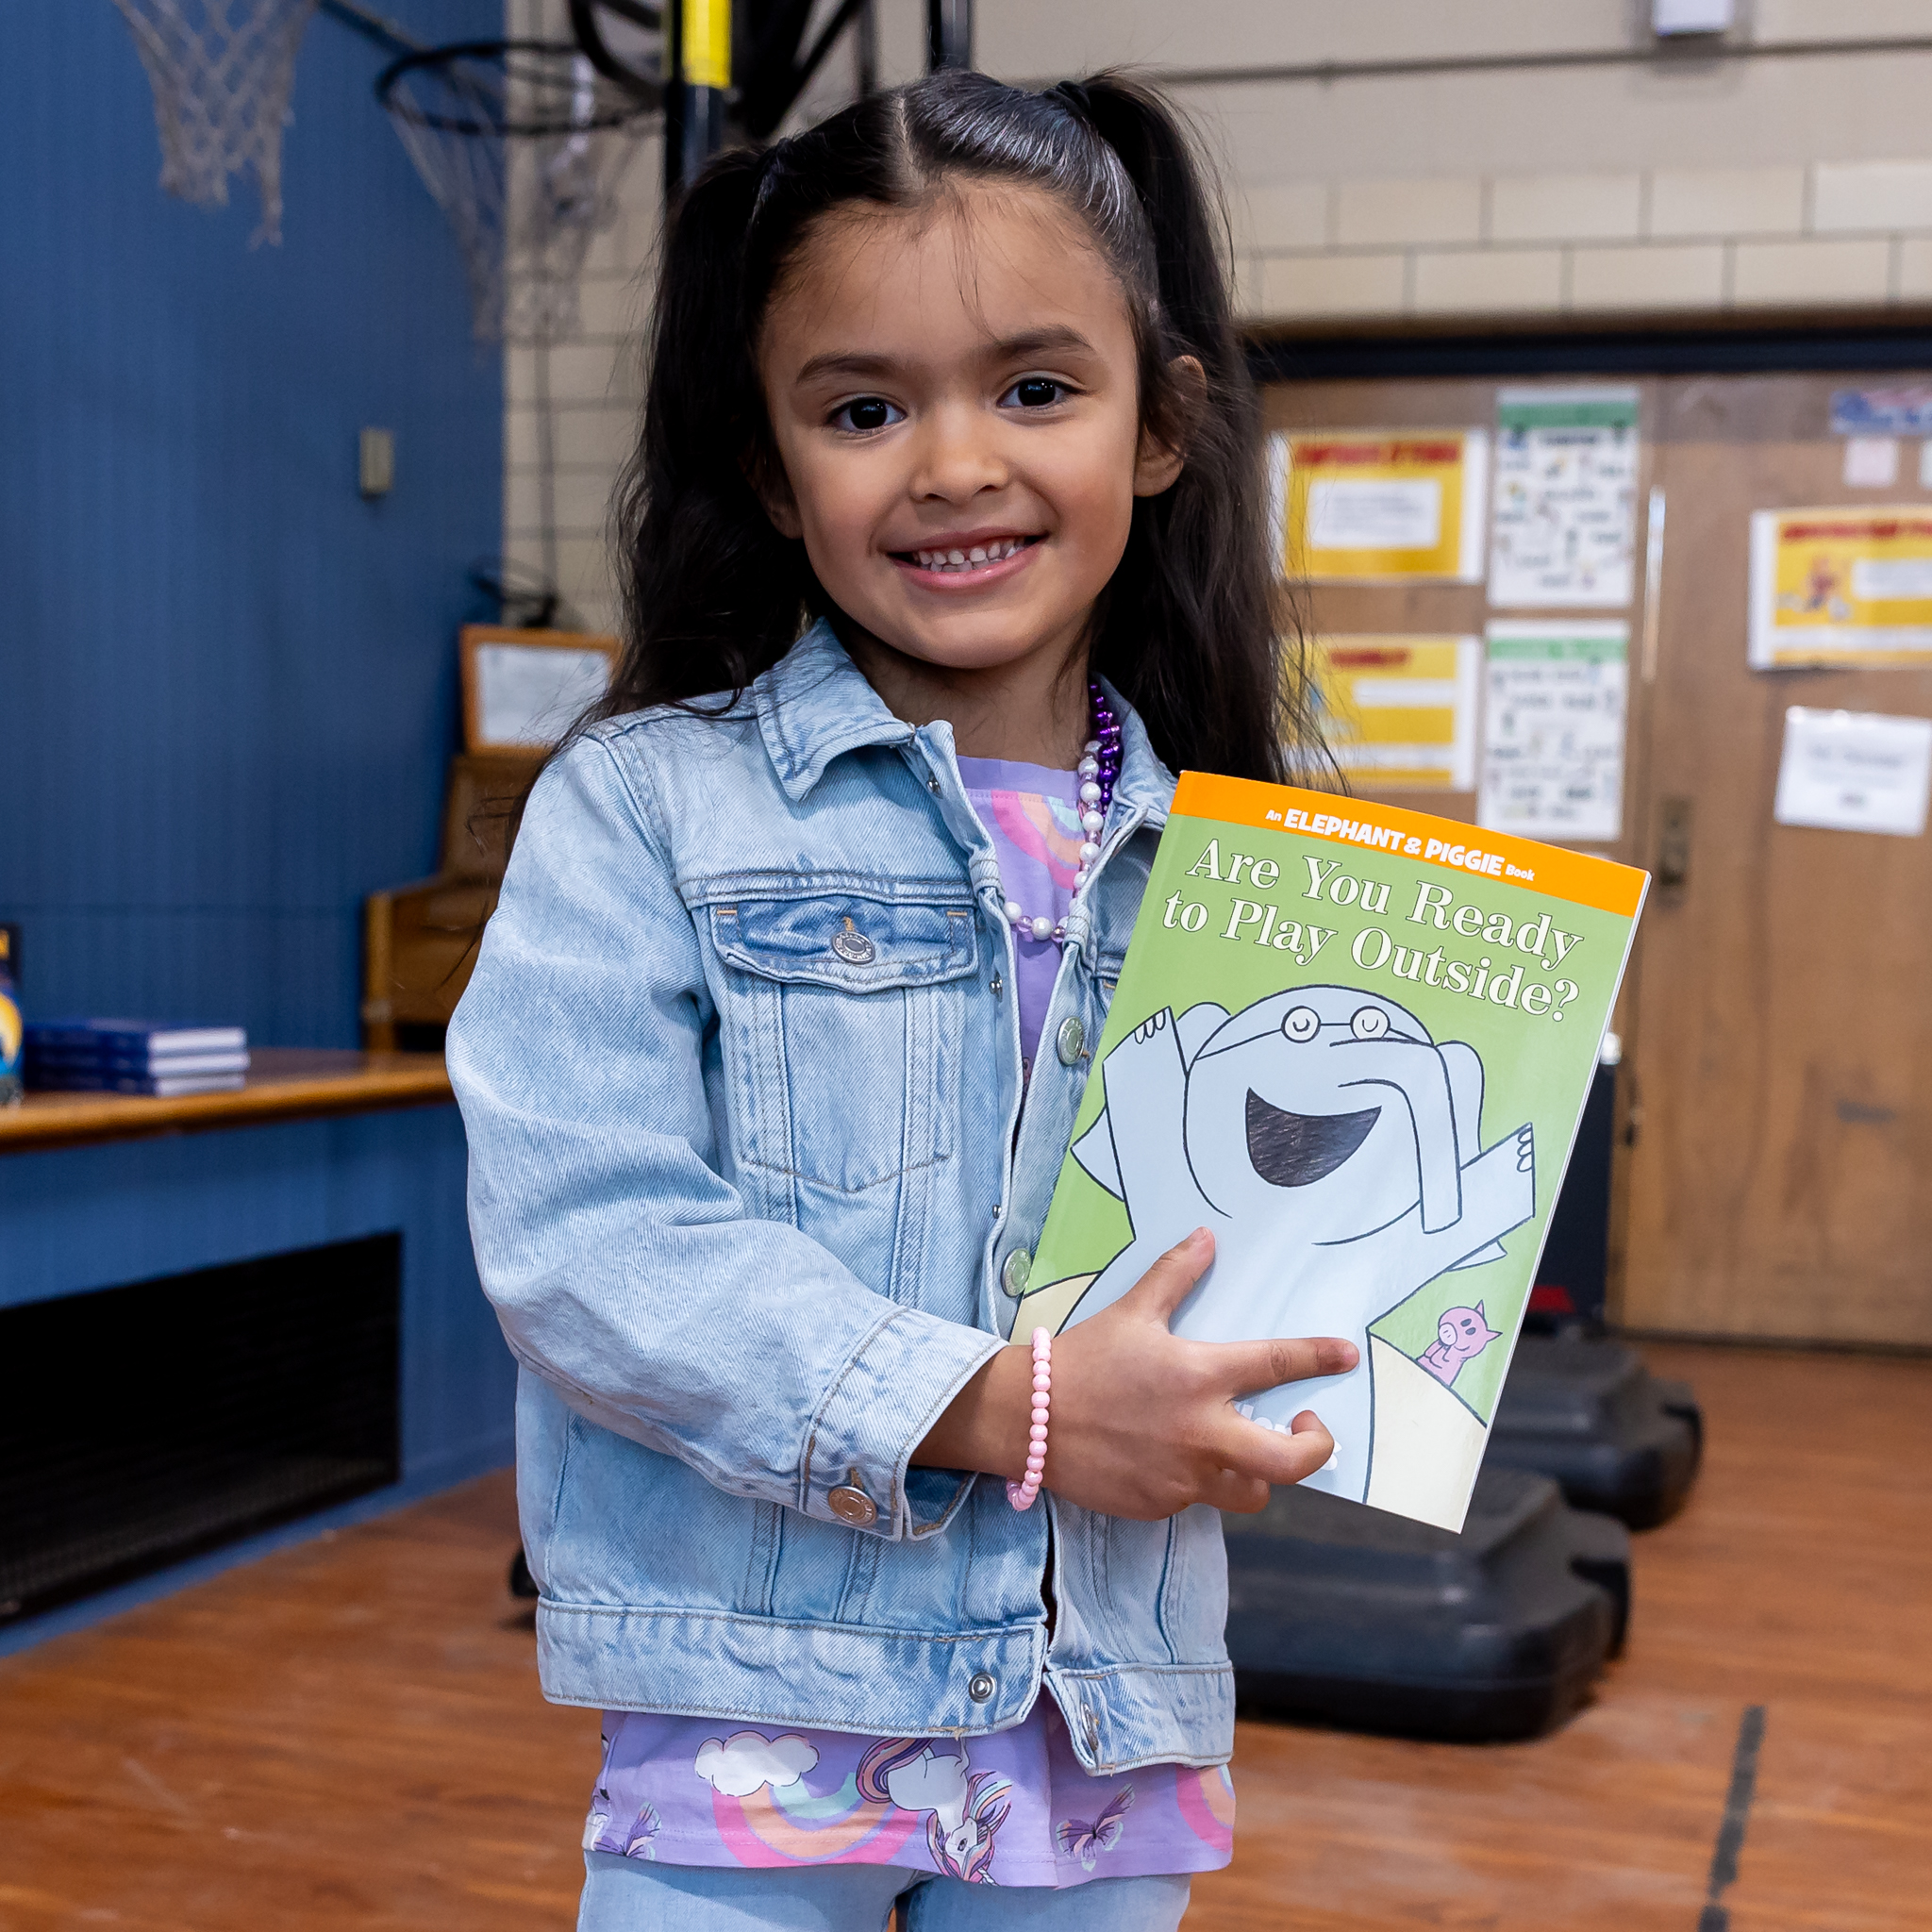 A young student holds up a book.